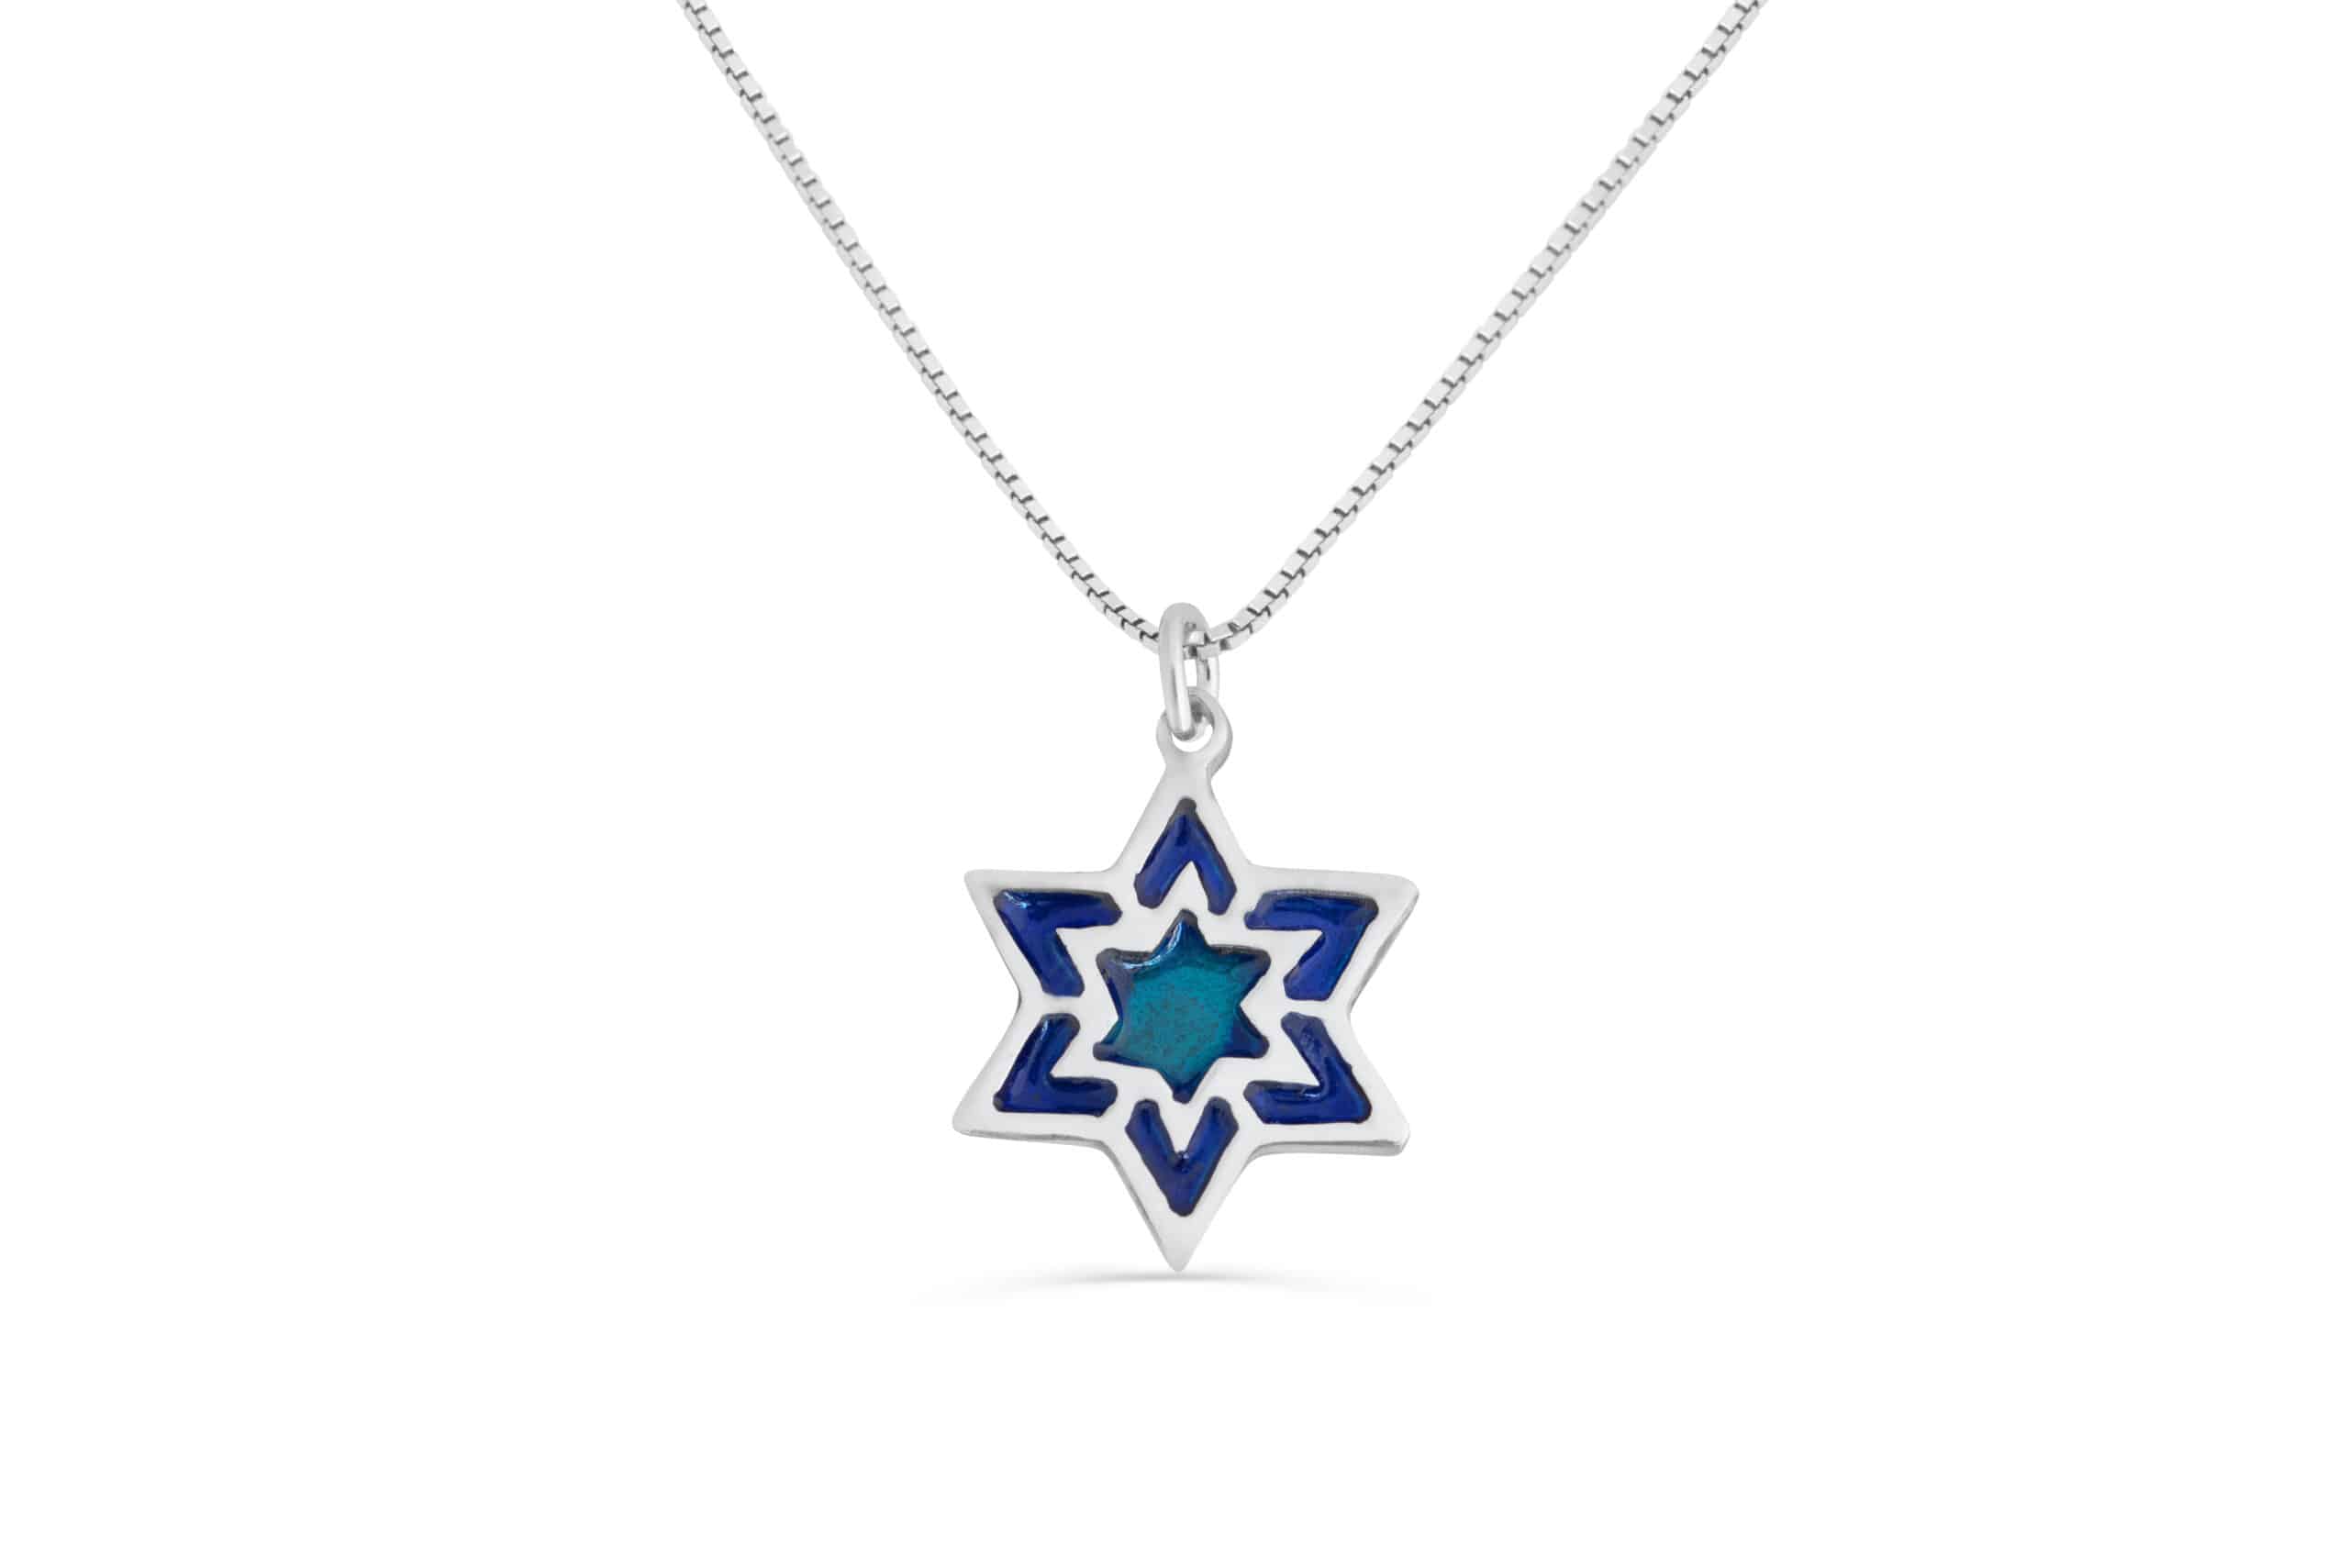 Small Magen David Necklace with Enamel